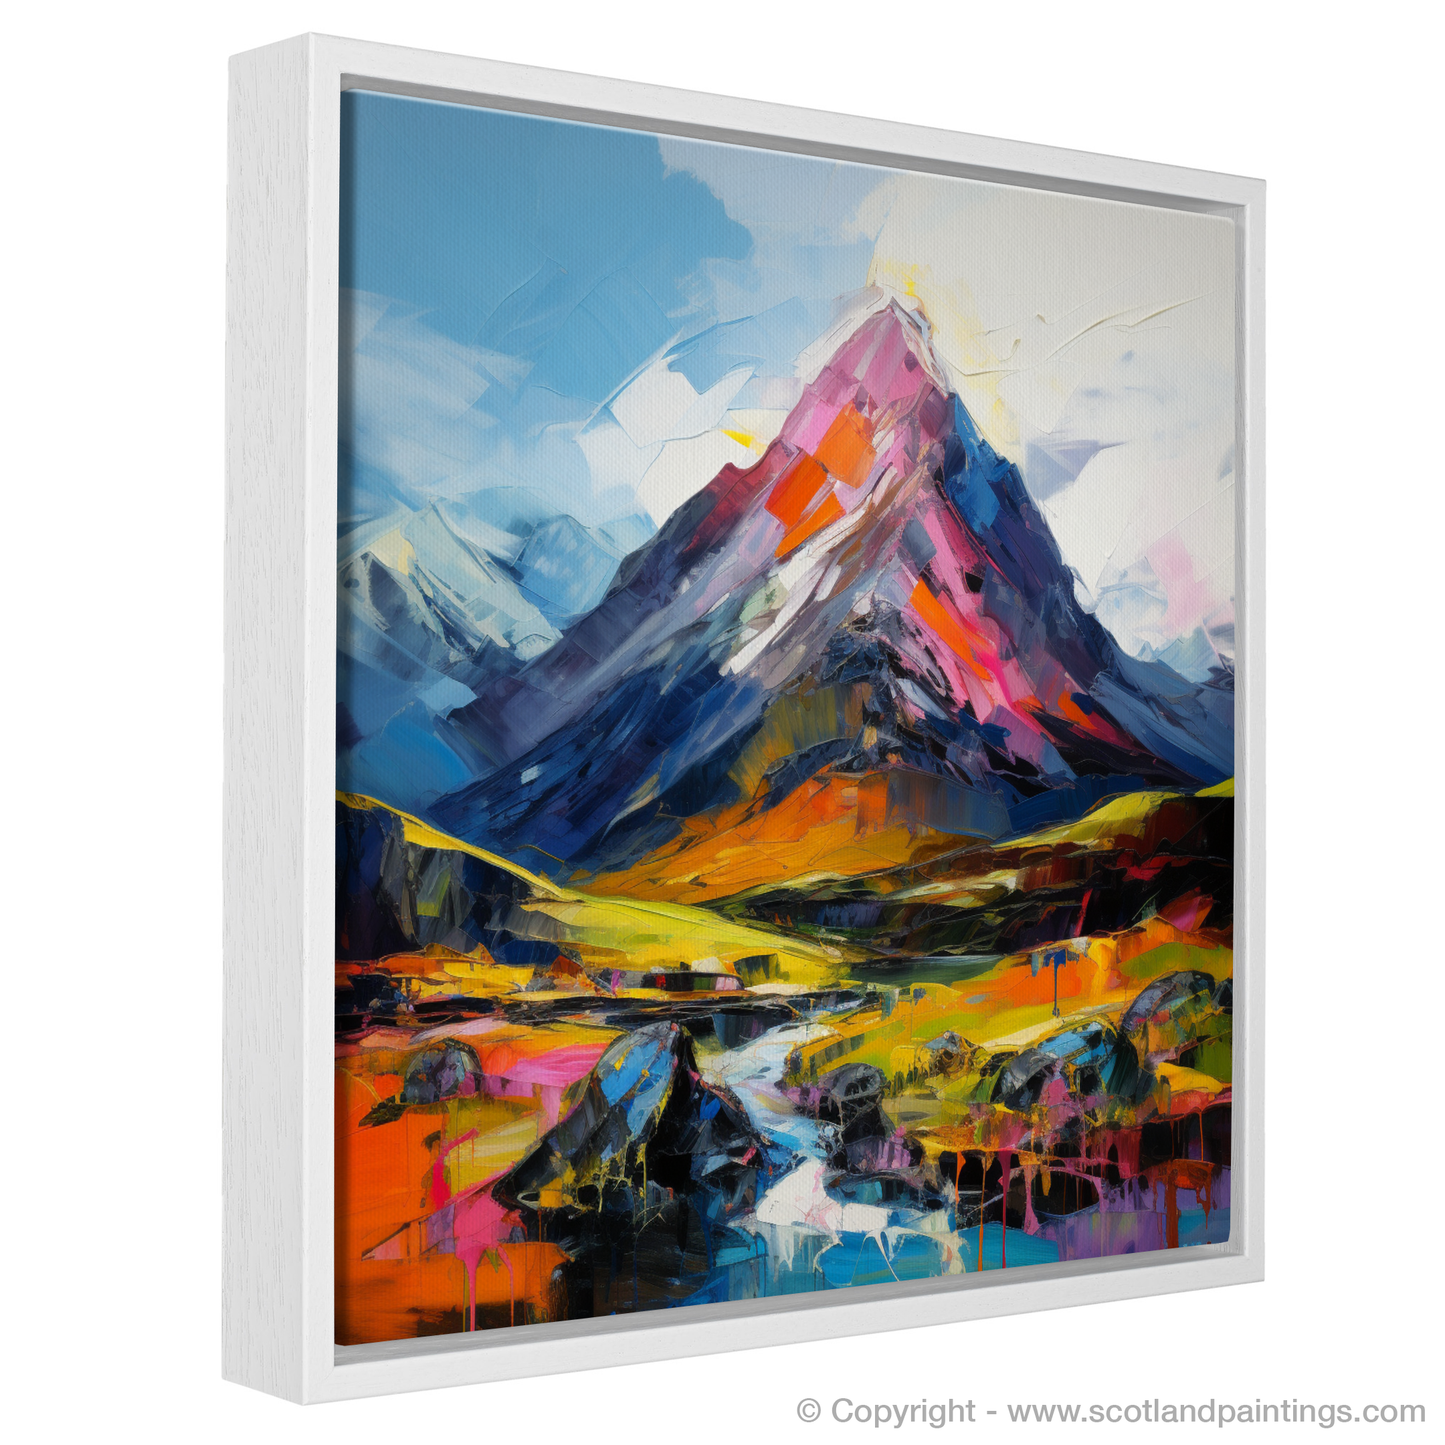 Painting and Art Print of Stob Binnein entitled "Majestic Stob Binnein: An Expressionist Ode to Scotland's Rugged Peaks".